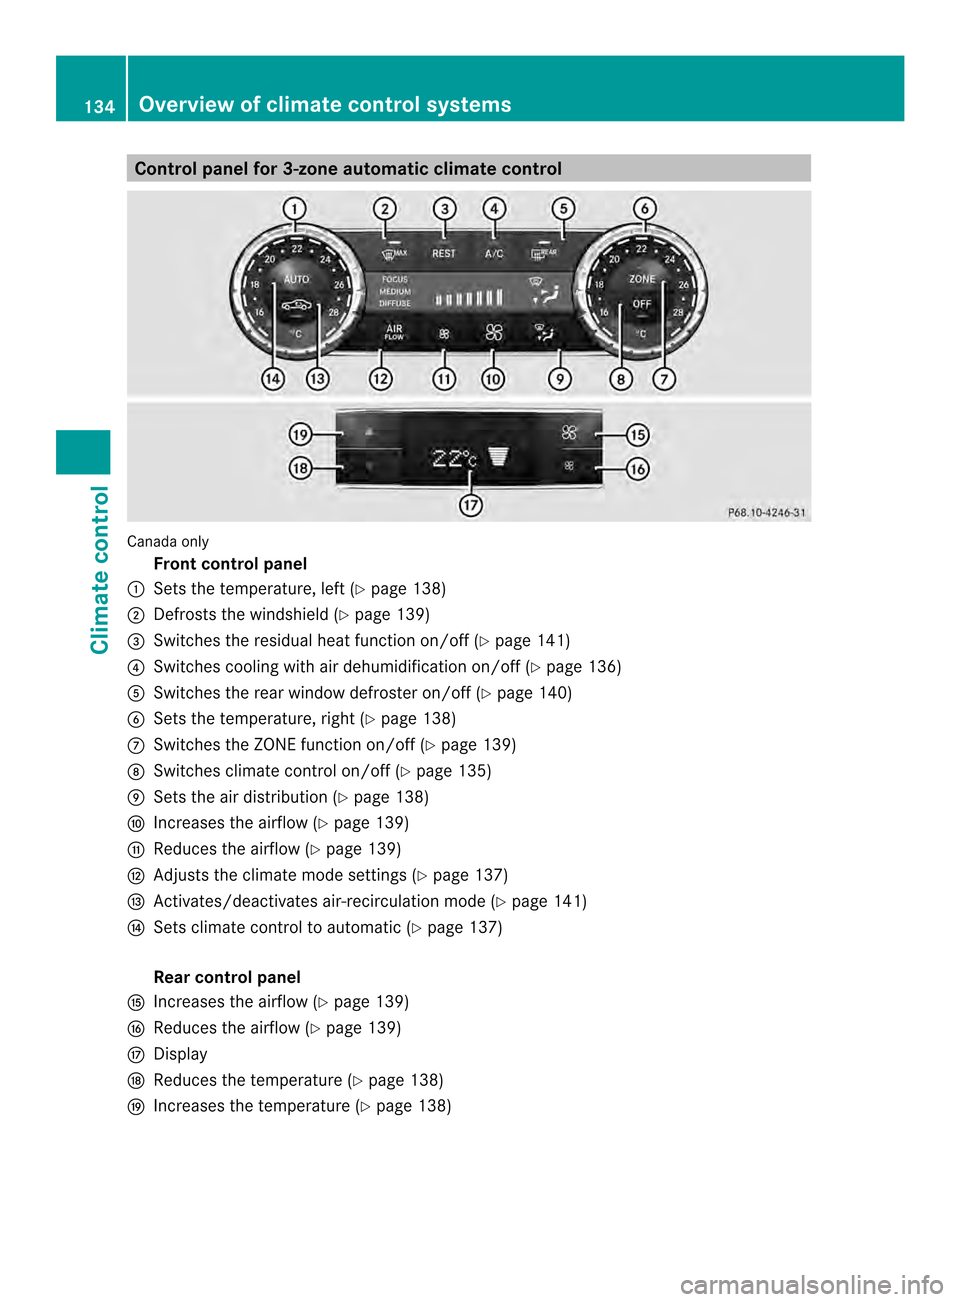 MERCEDES-BENZ CLS-Class 2014 W218 Owners Manual Control panel for 3-zone automatic climat
econtrol Canad
aonly
Fron tcontrol panel
001A Setsthe temperature, left (Y page 138)
0010 Defrosts th ewindshield (Y page 139)
0024 Switche sthe residual heat